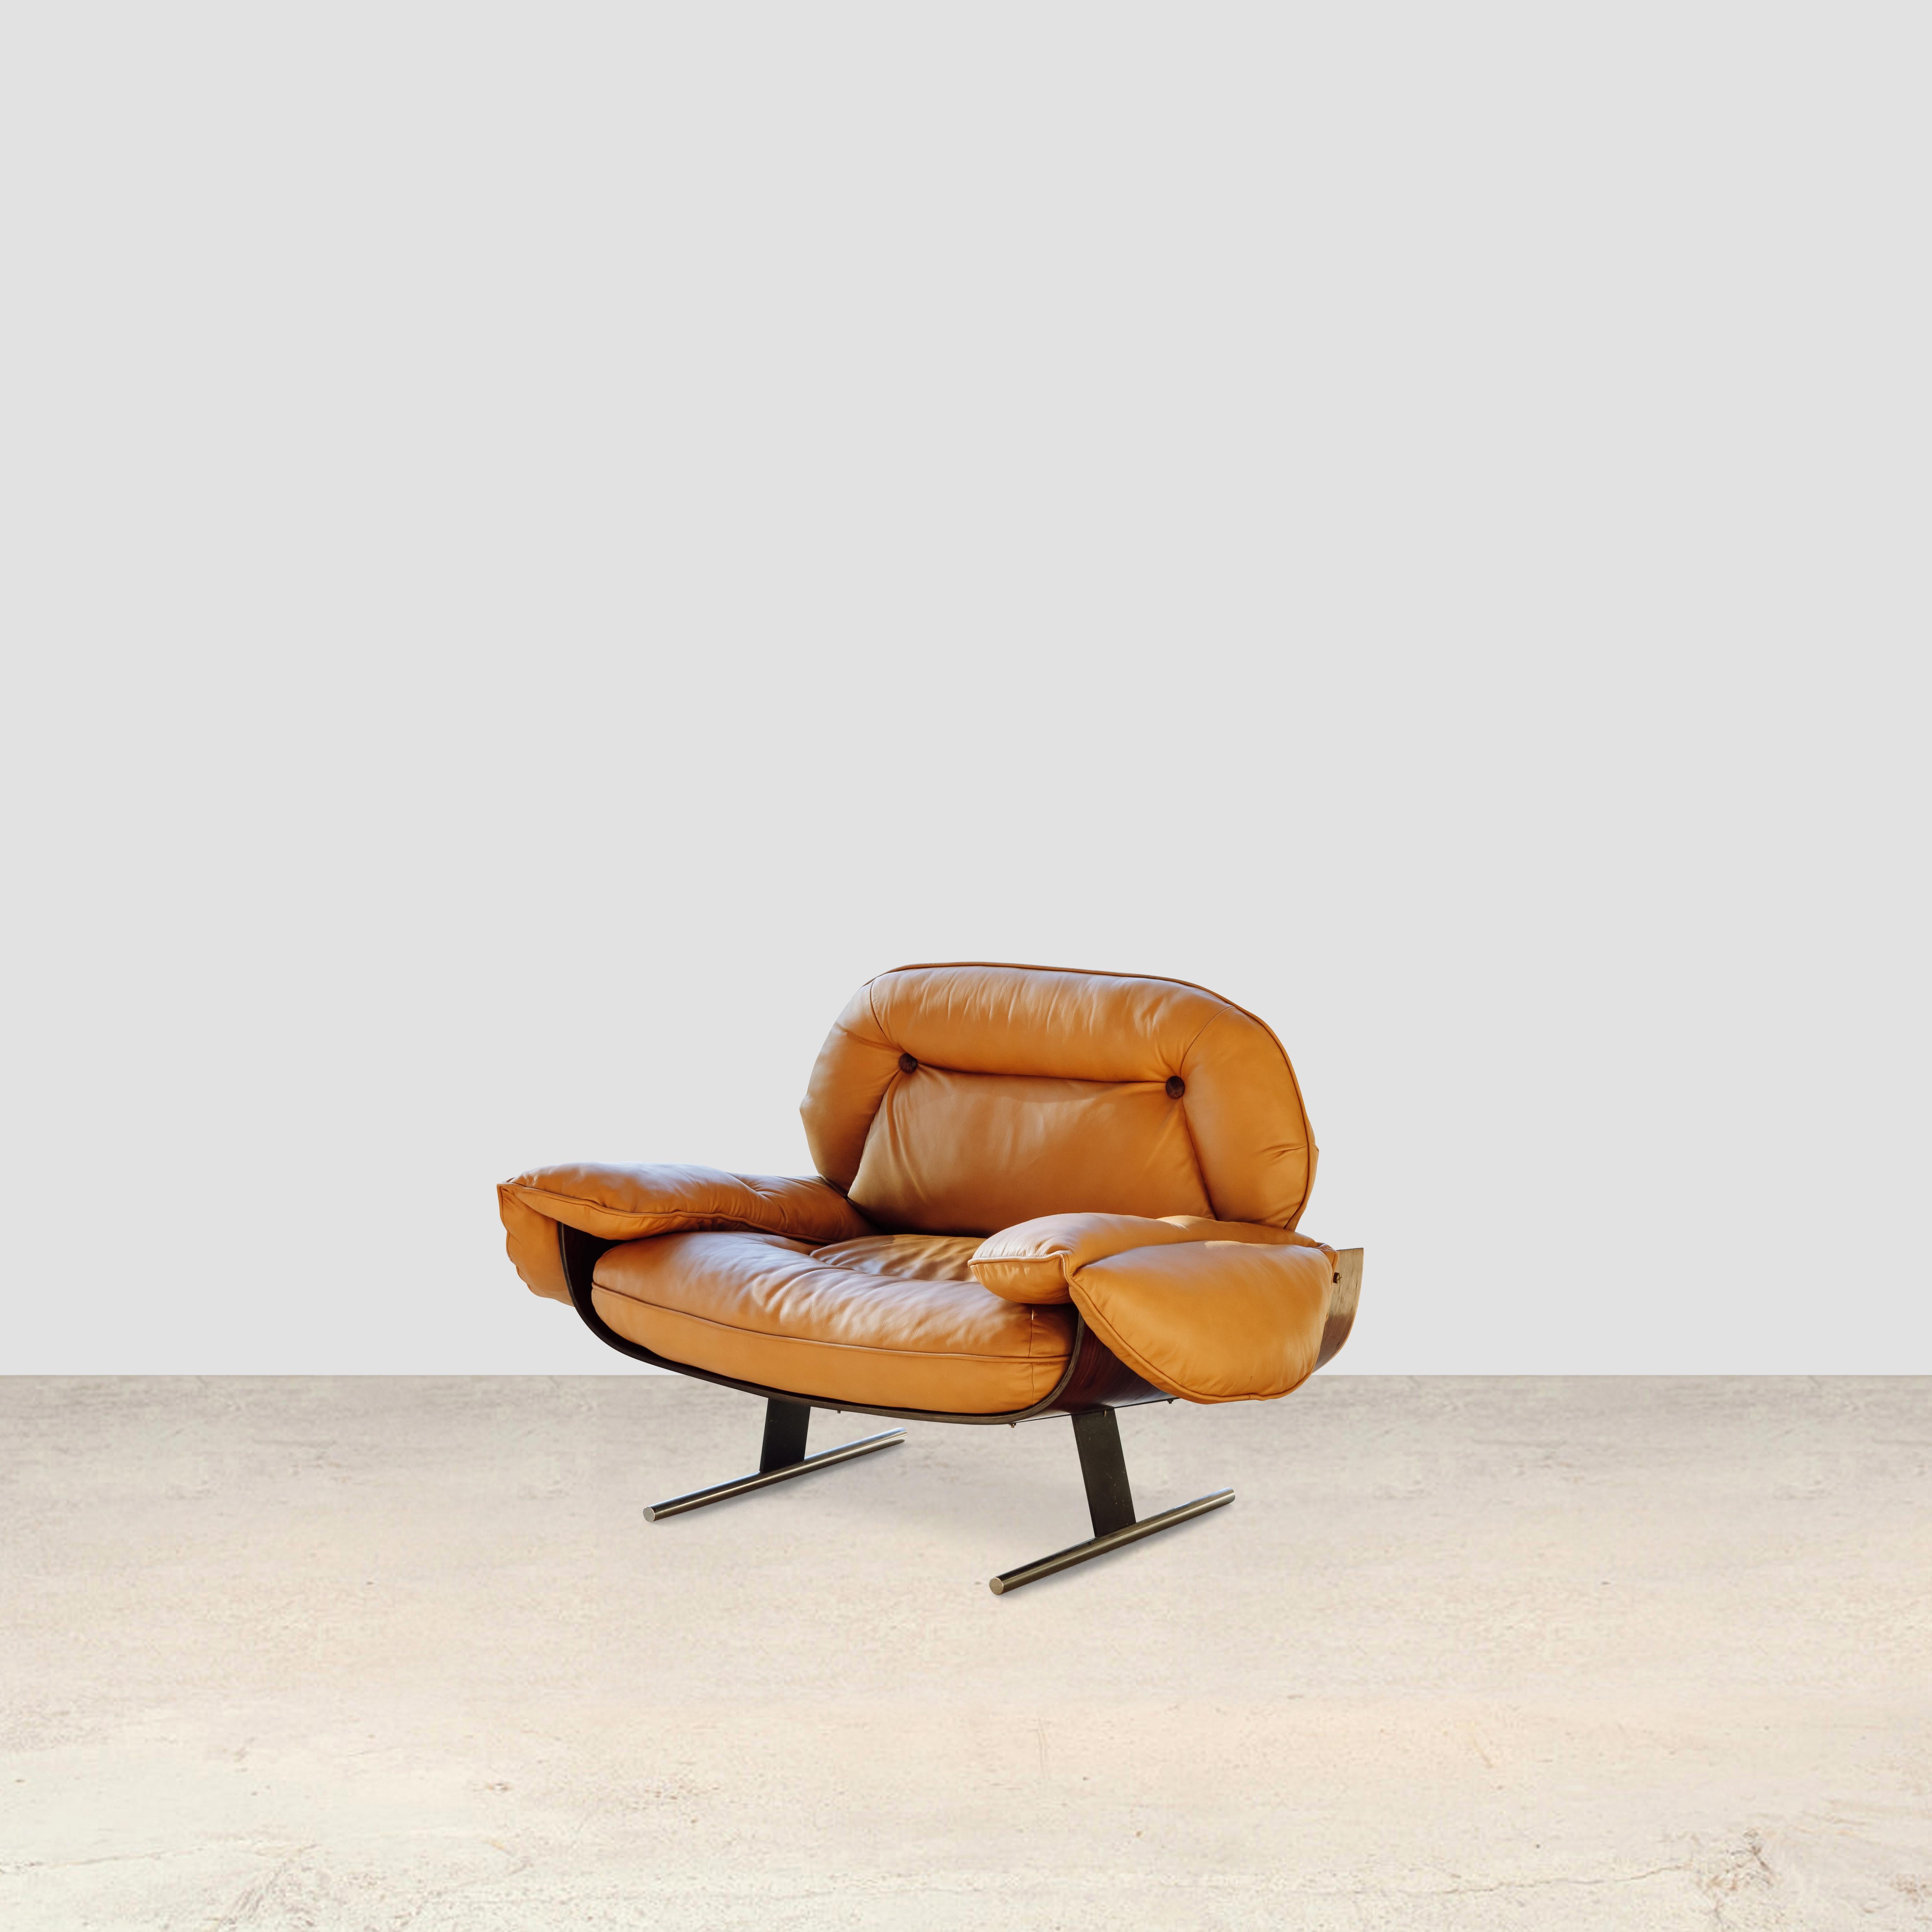 Presidential armchair
By Jorge Zalszupin 1960

“Presidencial” Armchairs designed by Jorge Zalszupin in 1960's. The piece features unique profile views from all angles. Structure made in Brazilian rosewood and chrome•plated steel sled